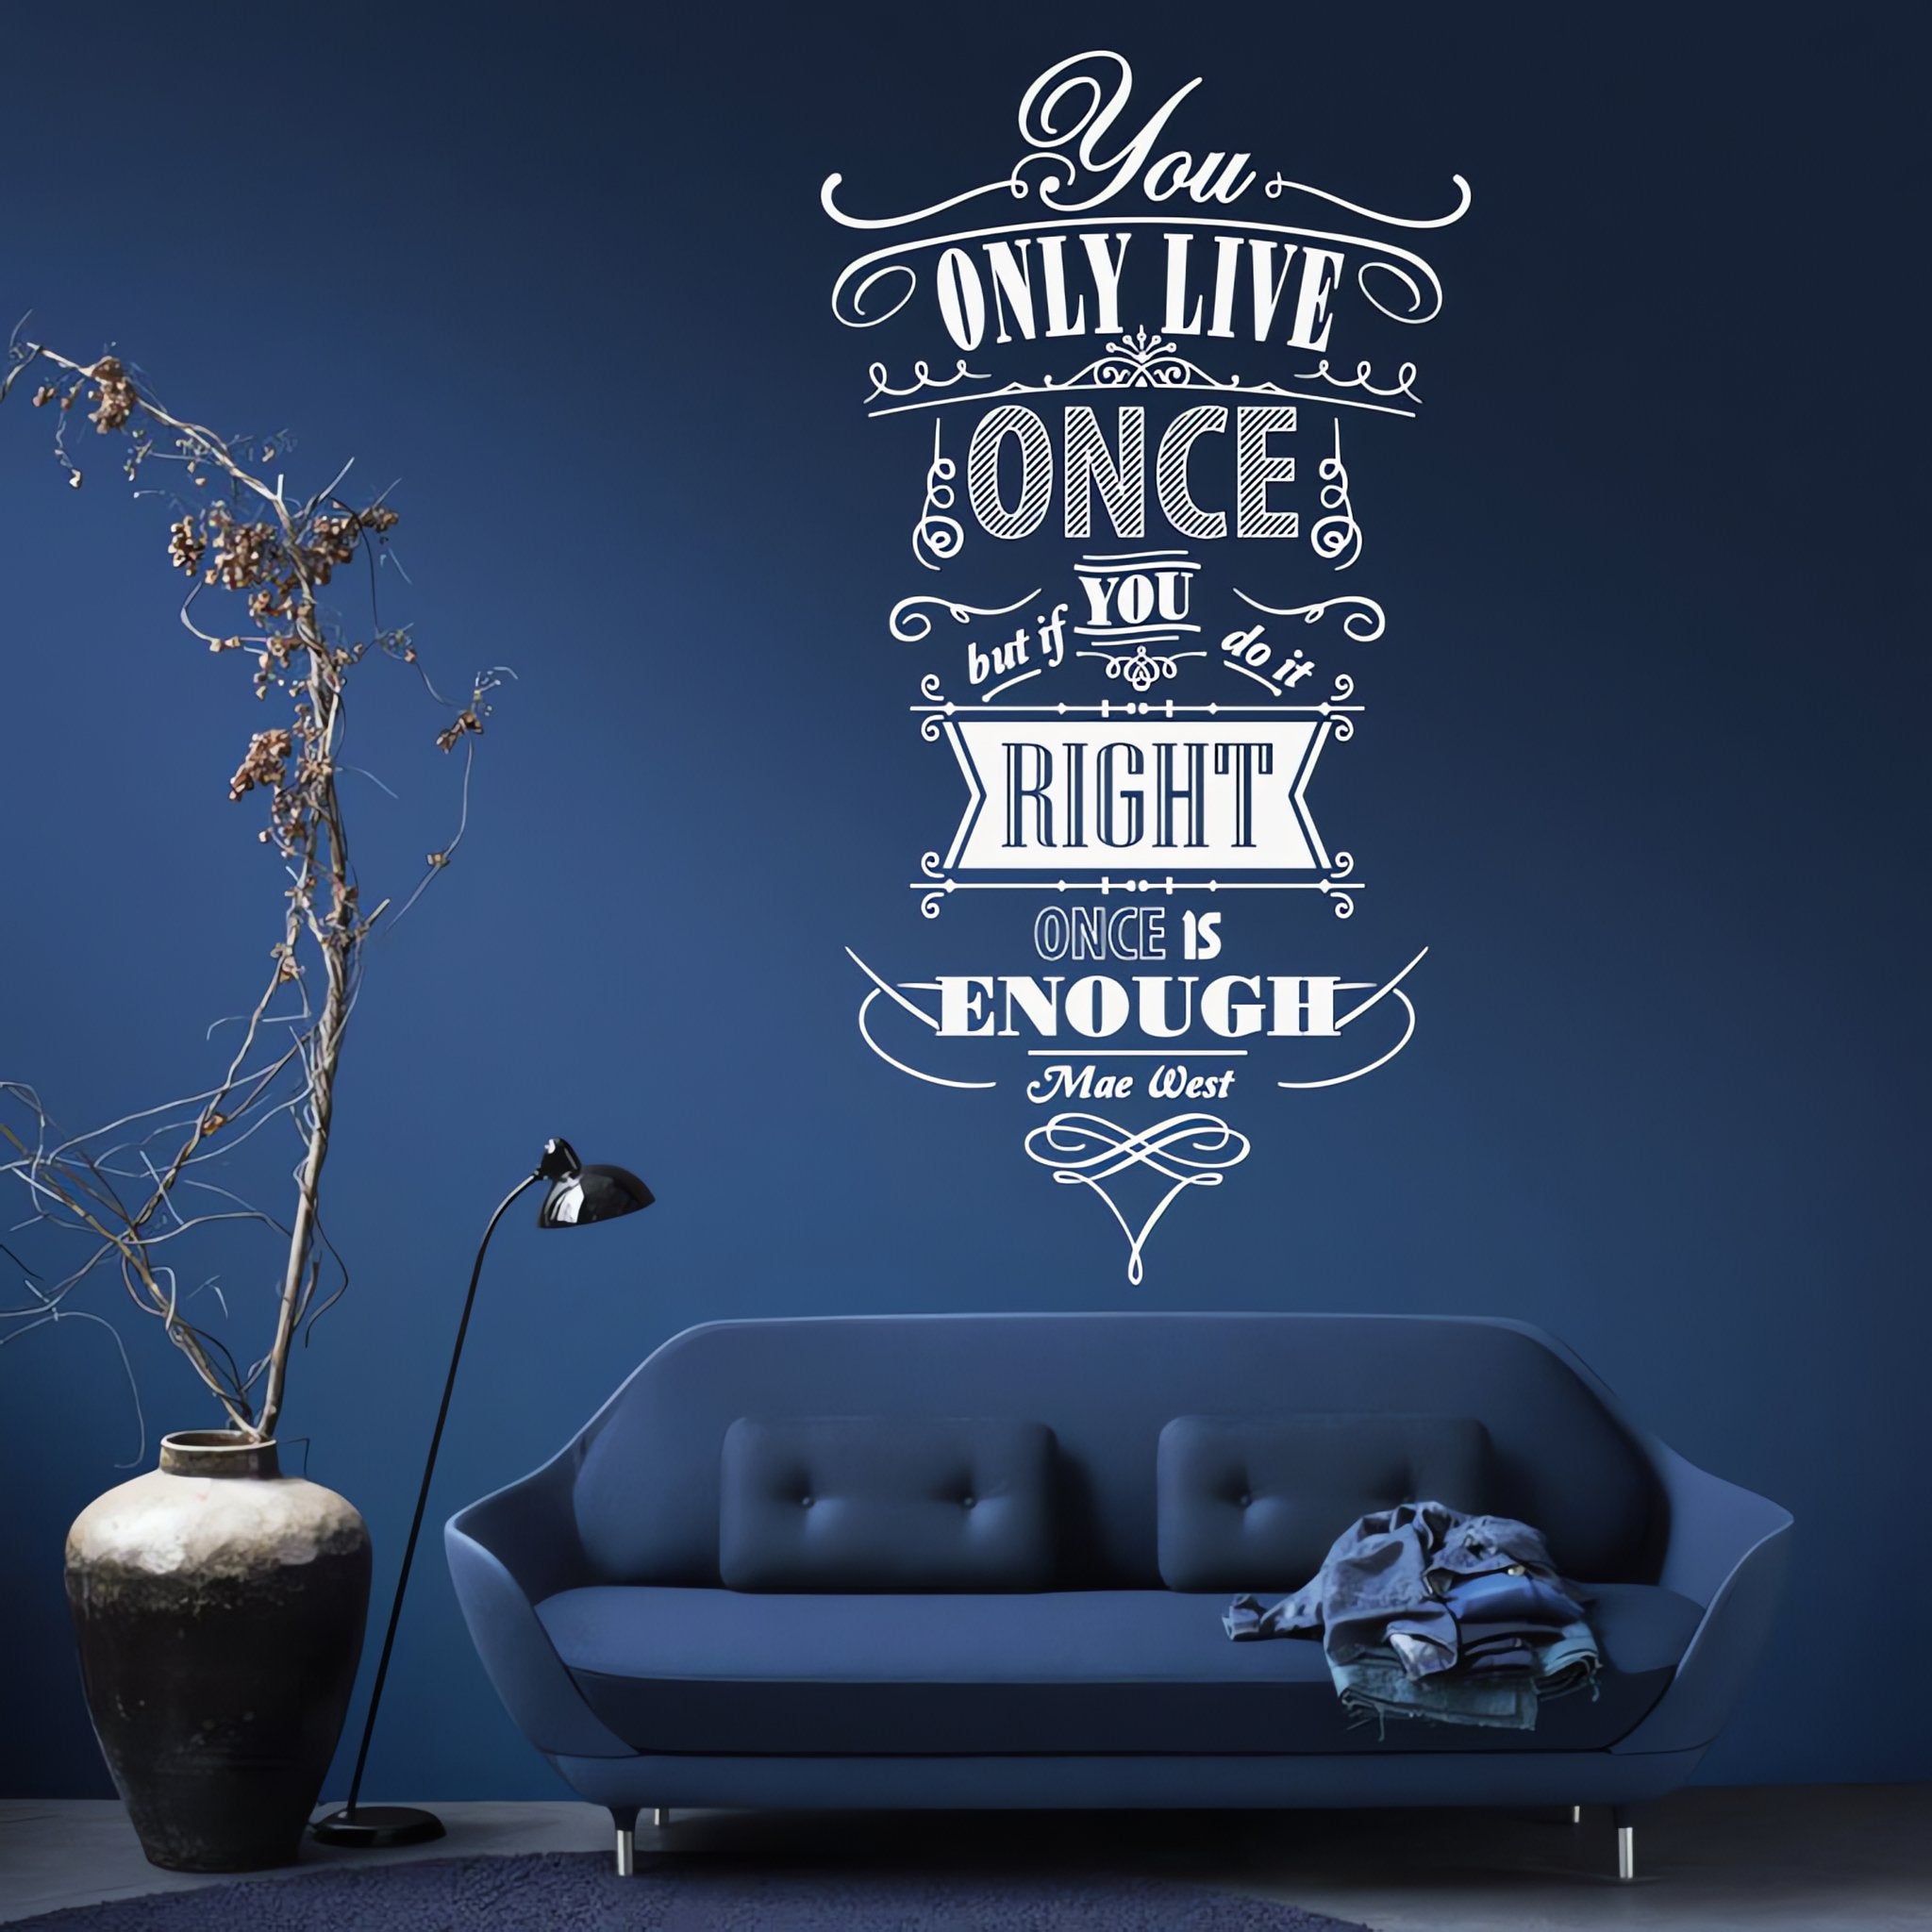 Wall quote sticker with text "You Only Live Once But If You Do It Right Once Is Enough" in a blue room with a couch and a potted plant.